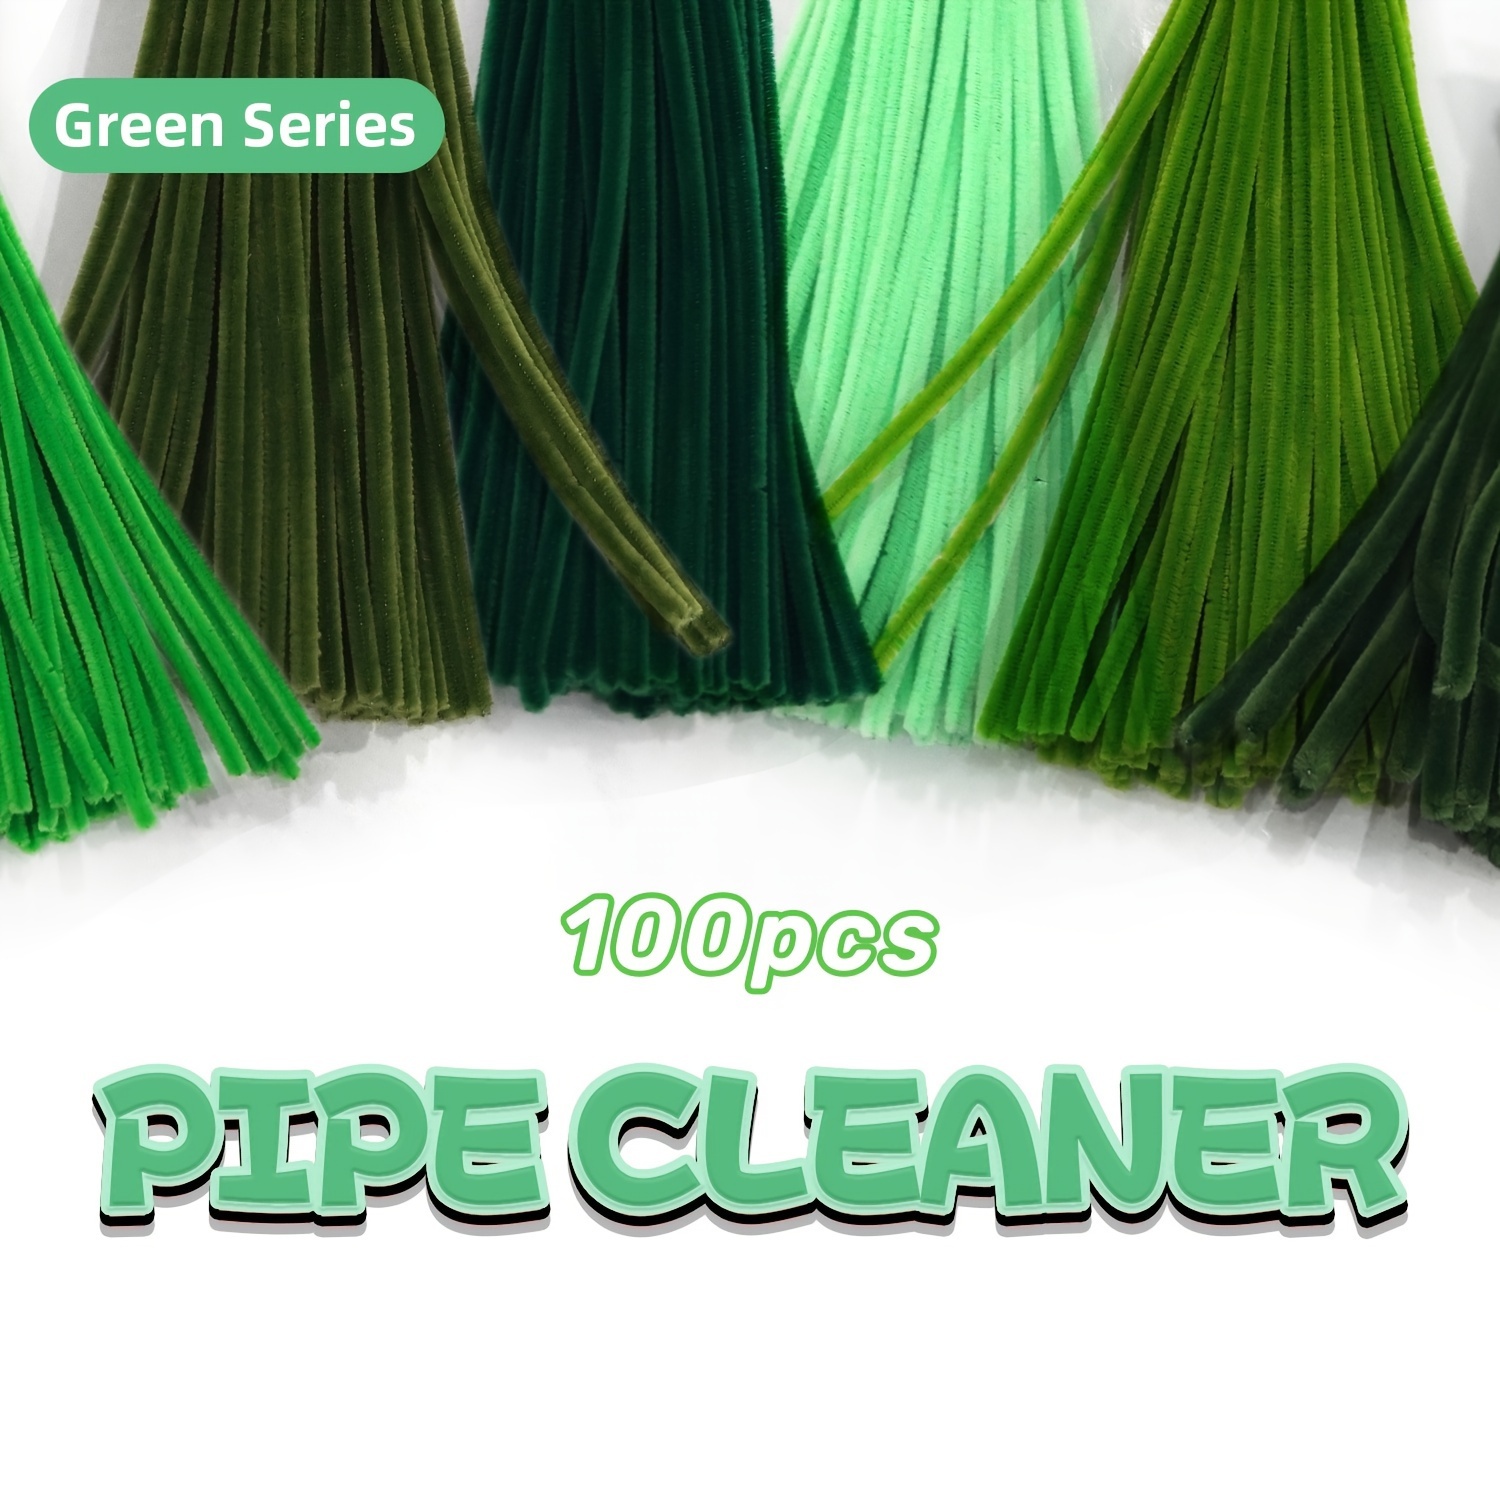 

100pcs Green Series Pipe Cleaner, Upgrade Chenille Twist Sticks, Can Be Used For Christmas Handmade Projects